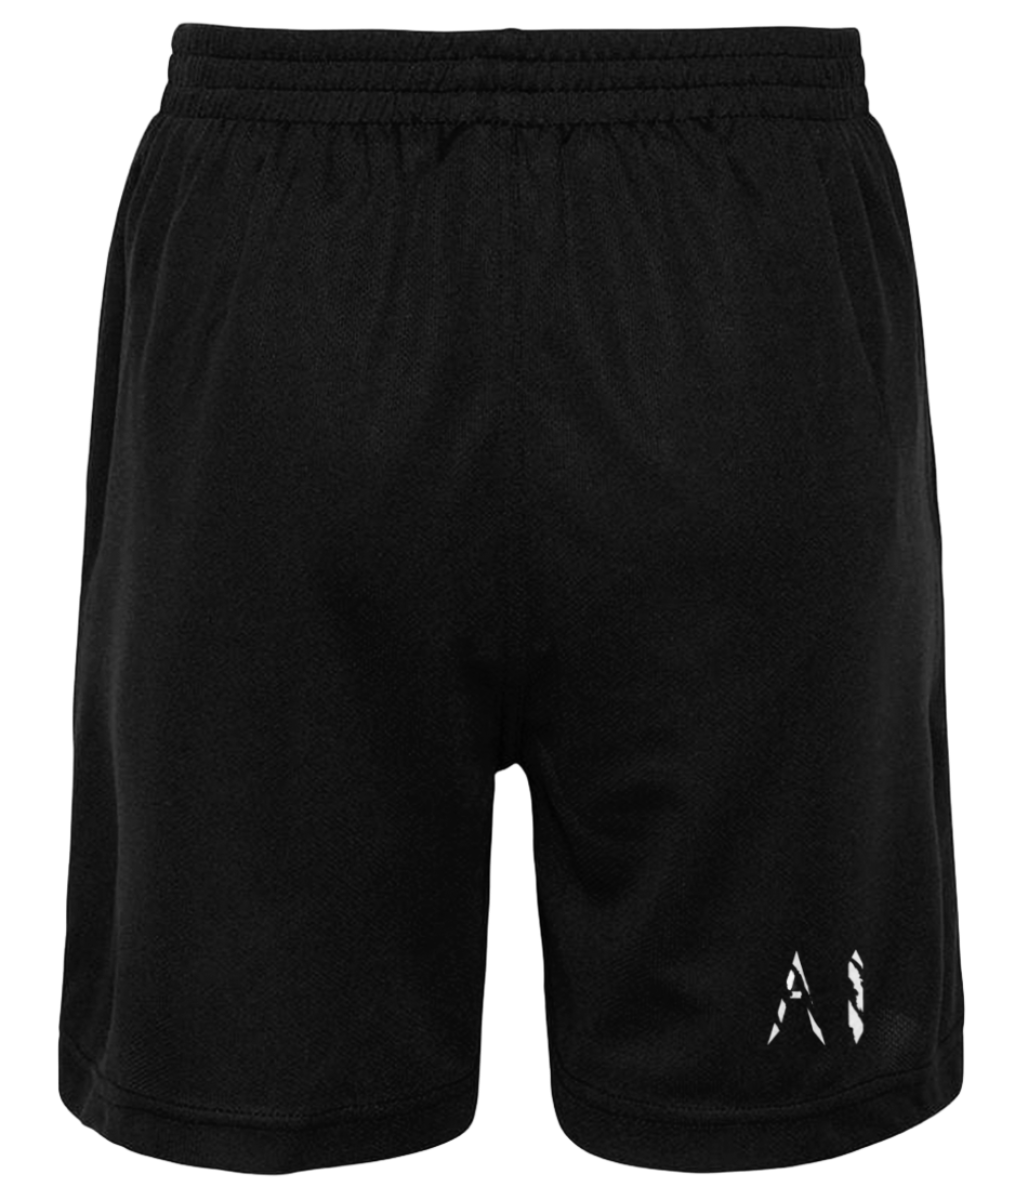 Mens Athletic Sports Shorts Black with white AI logo on the bottom of the left leg